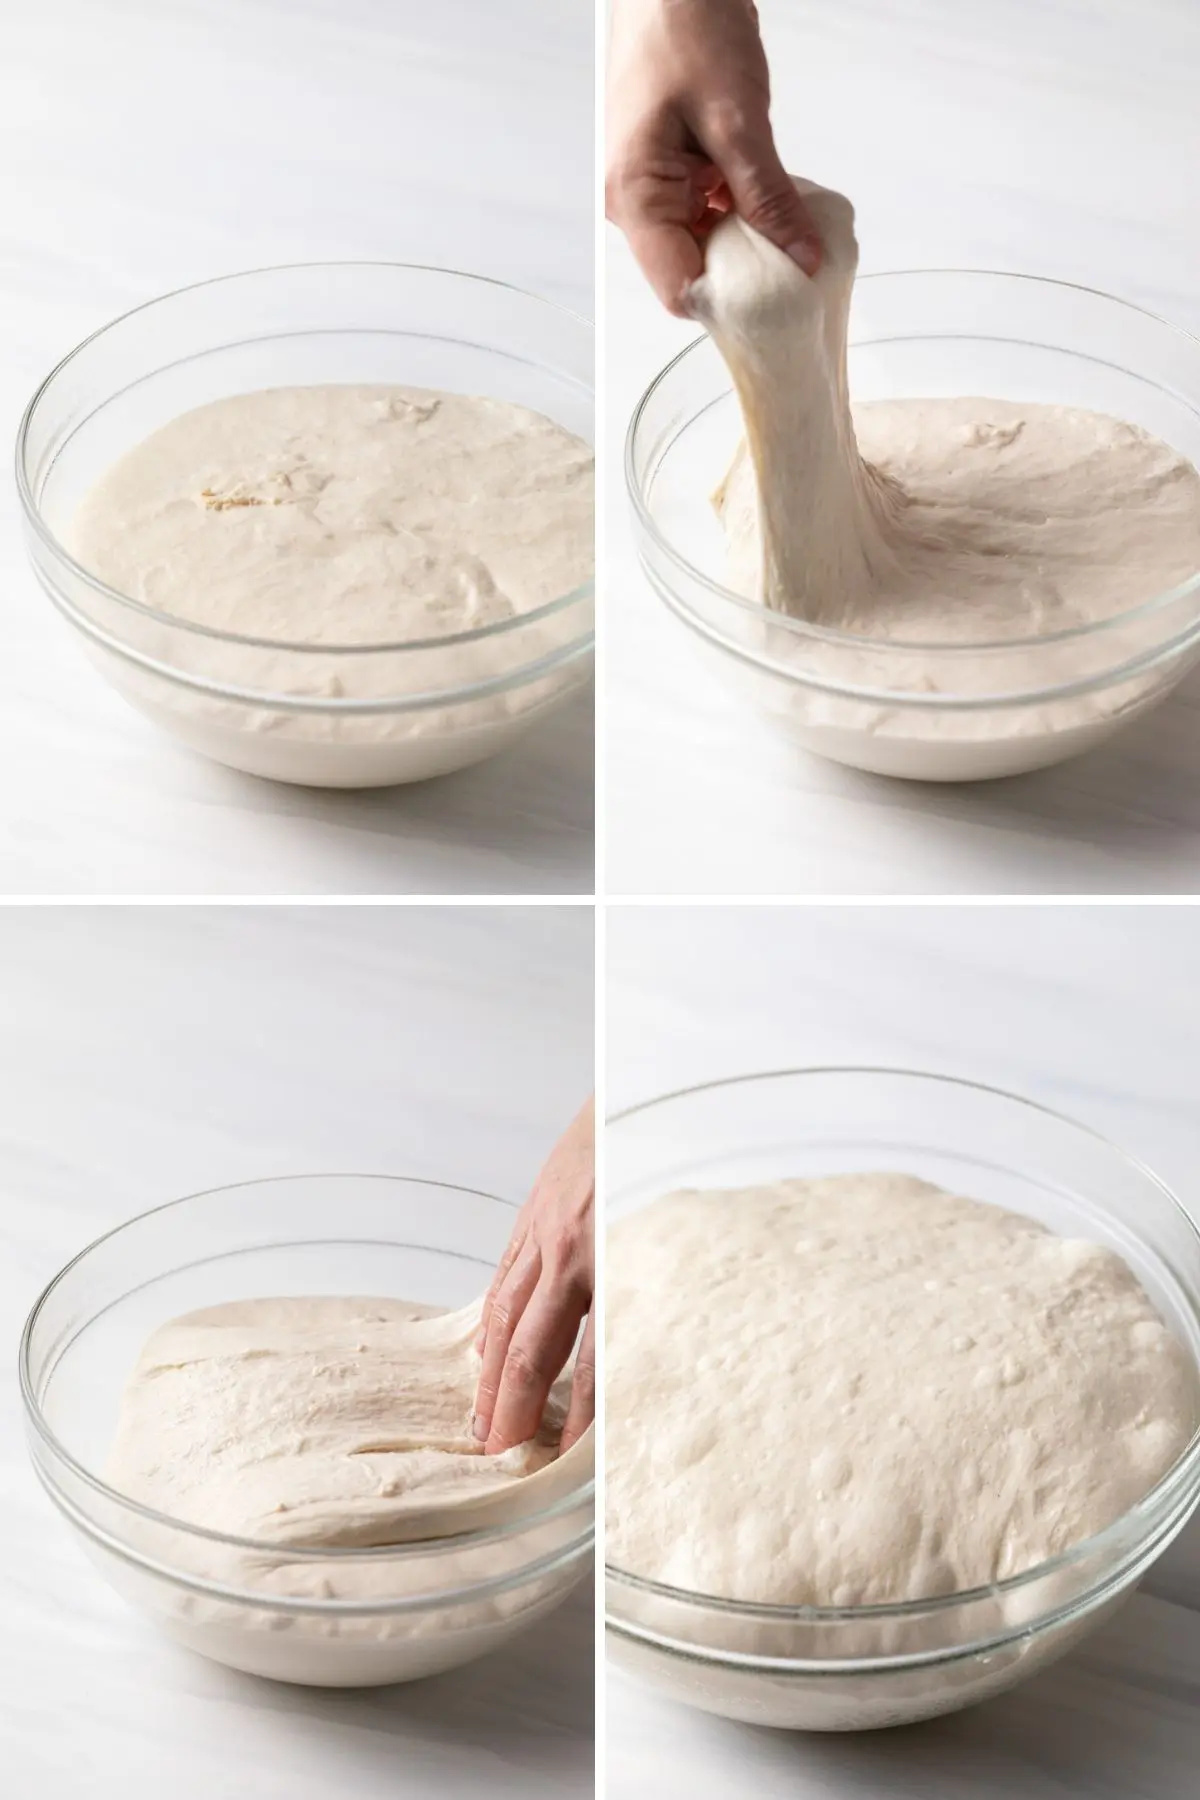 process shots showing bowl of dough, stretching the dough, and folding it over onto itself